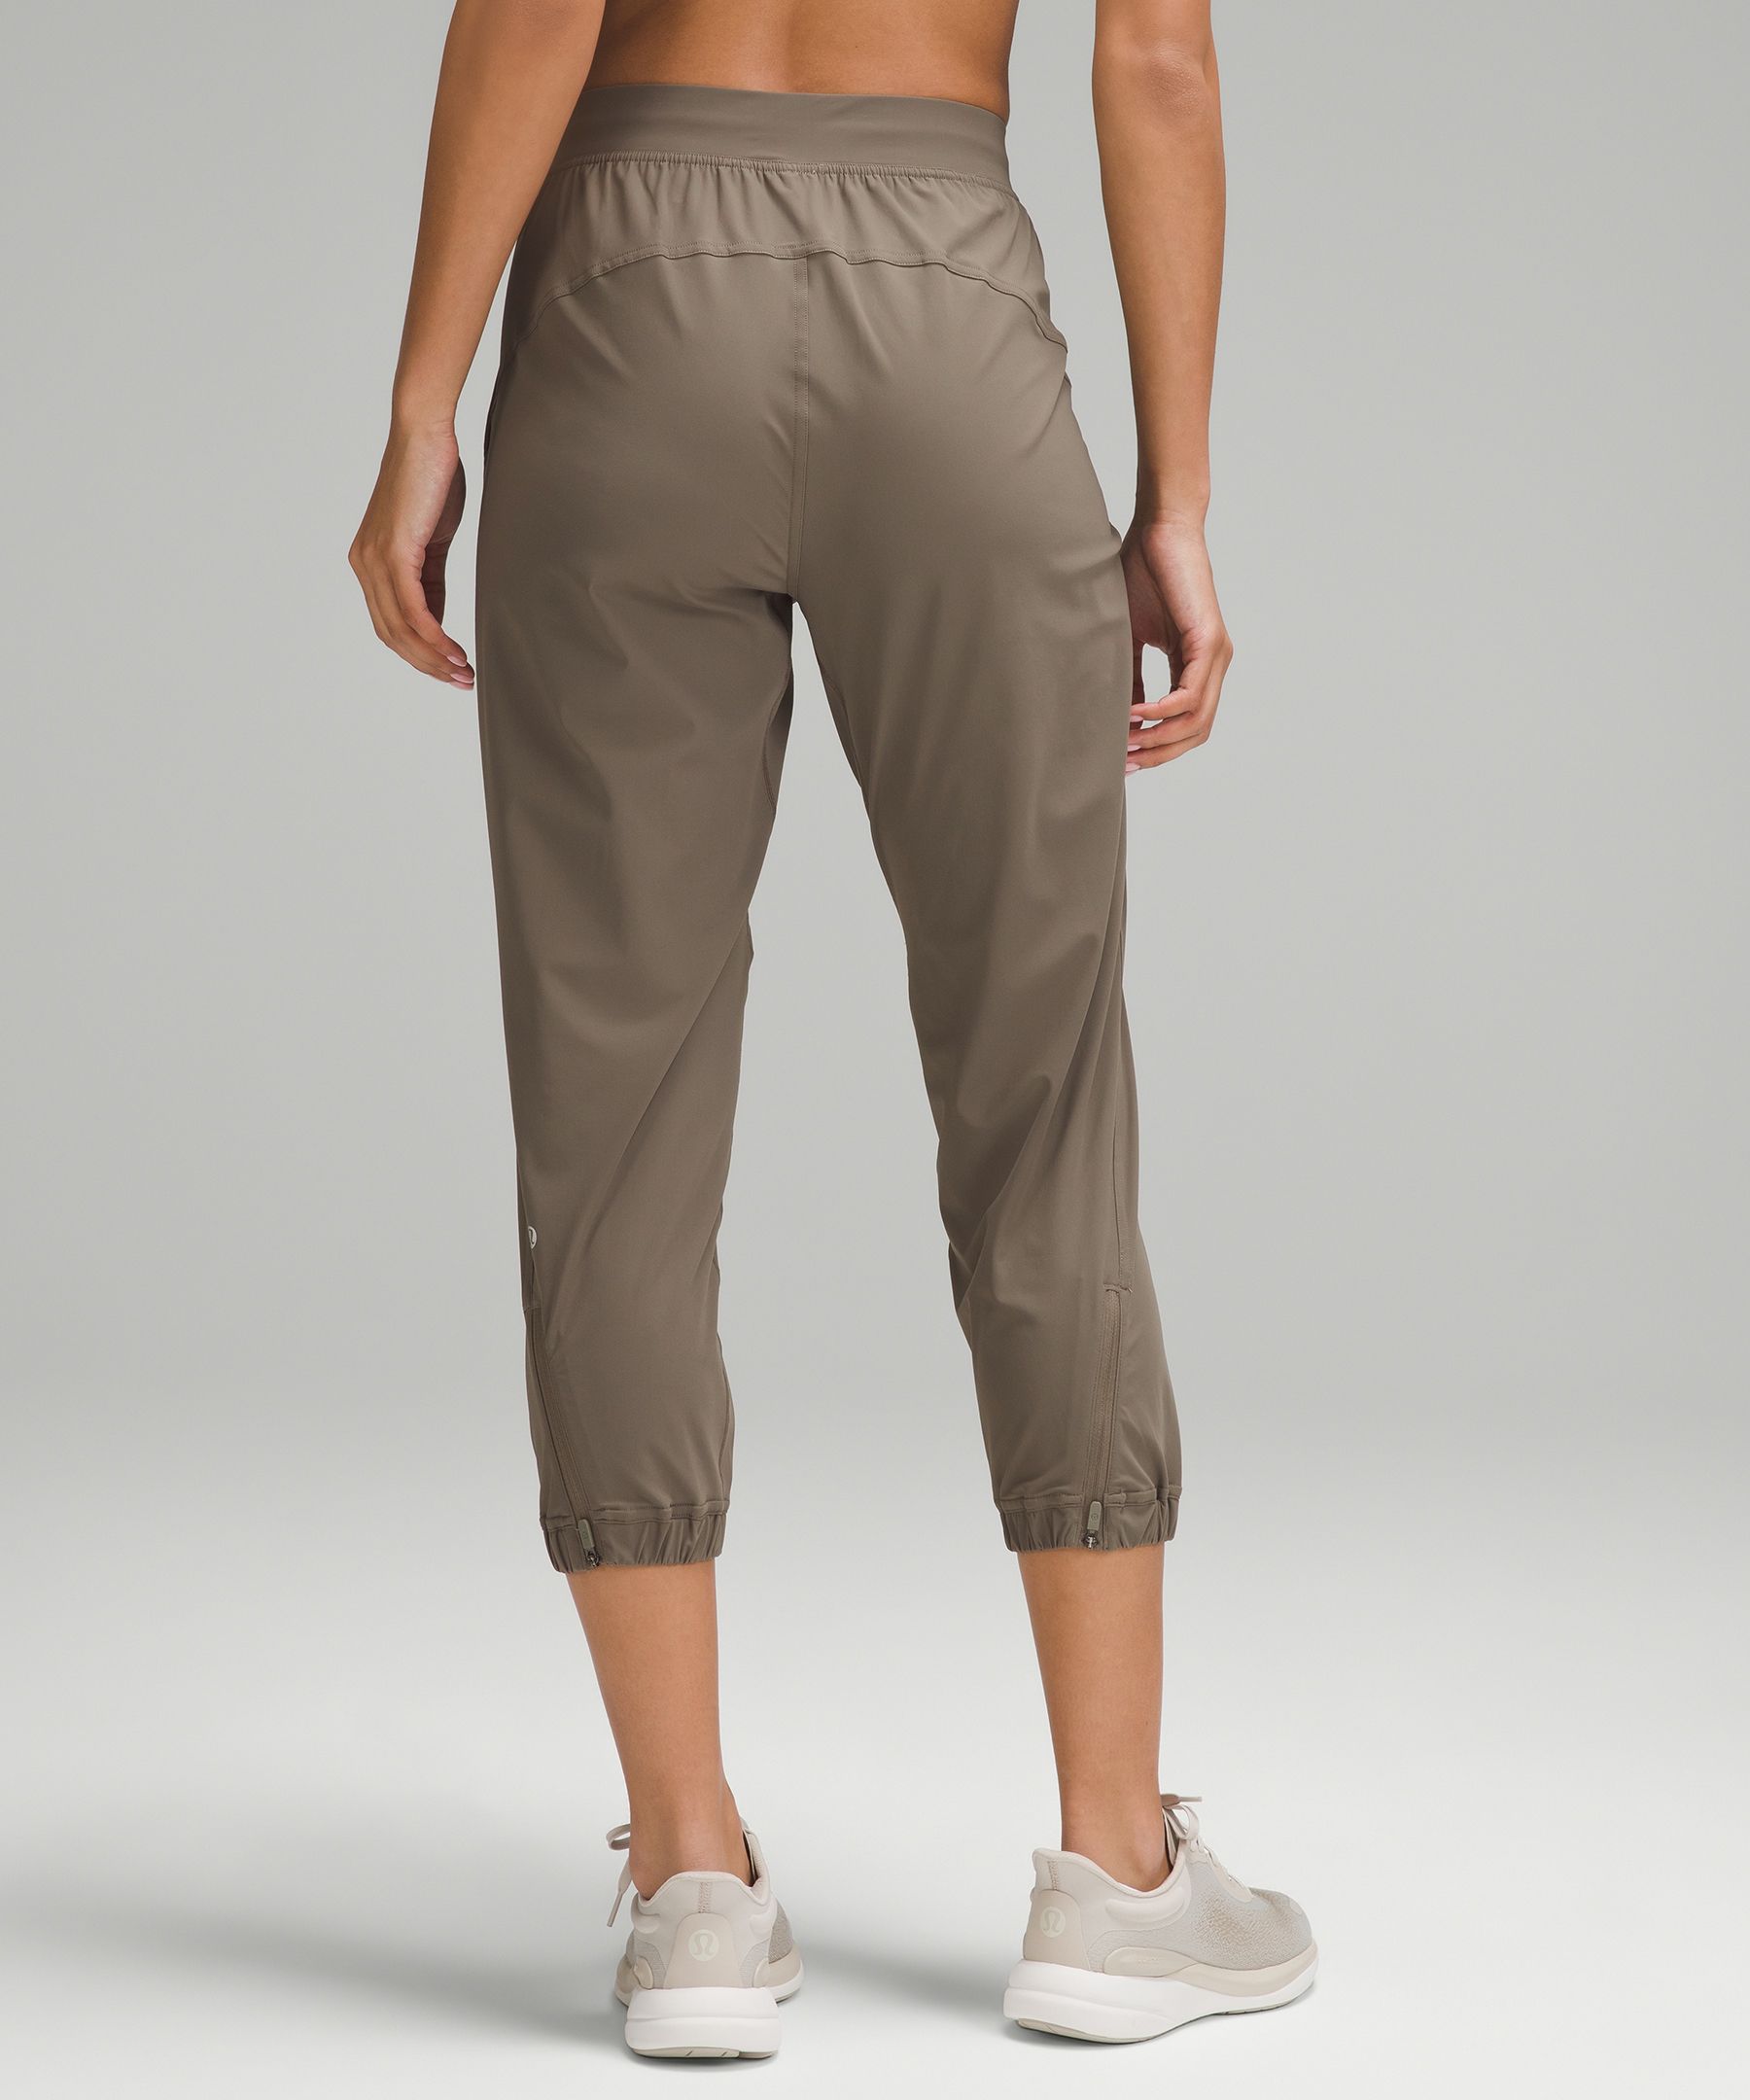 NWT Lululemon Adapted State HR Jogger Size 6 Dark Olive 28” Sold Out!